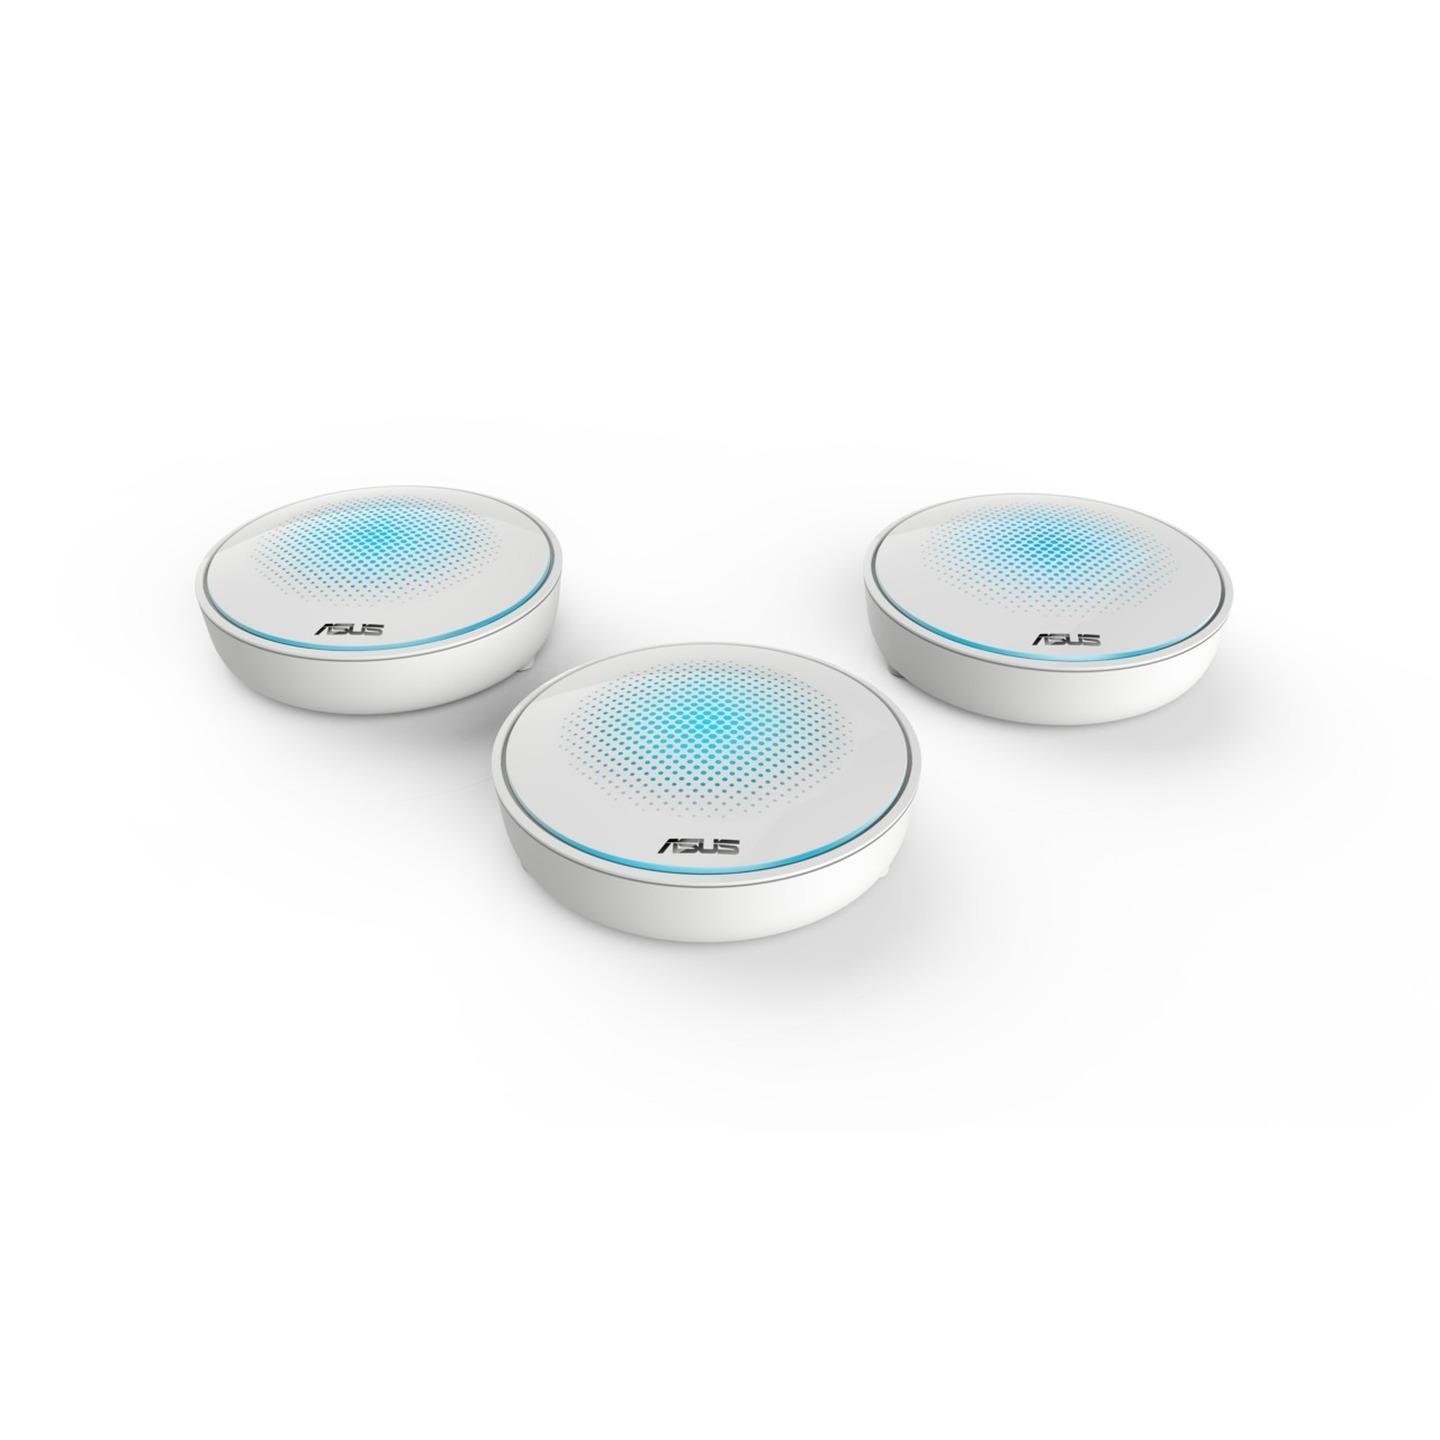 ASUS Lyra Whole-Home Wi-Fi Mesh Network